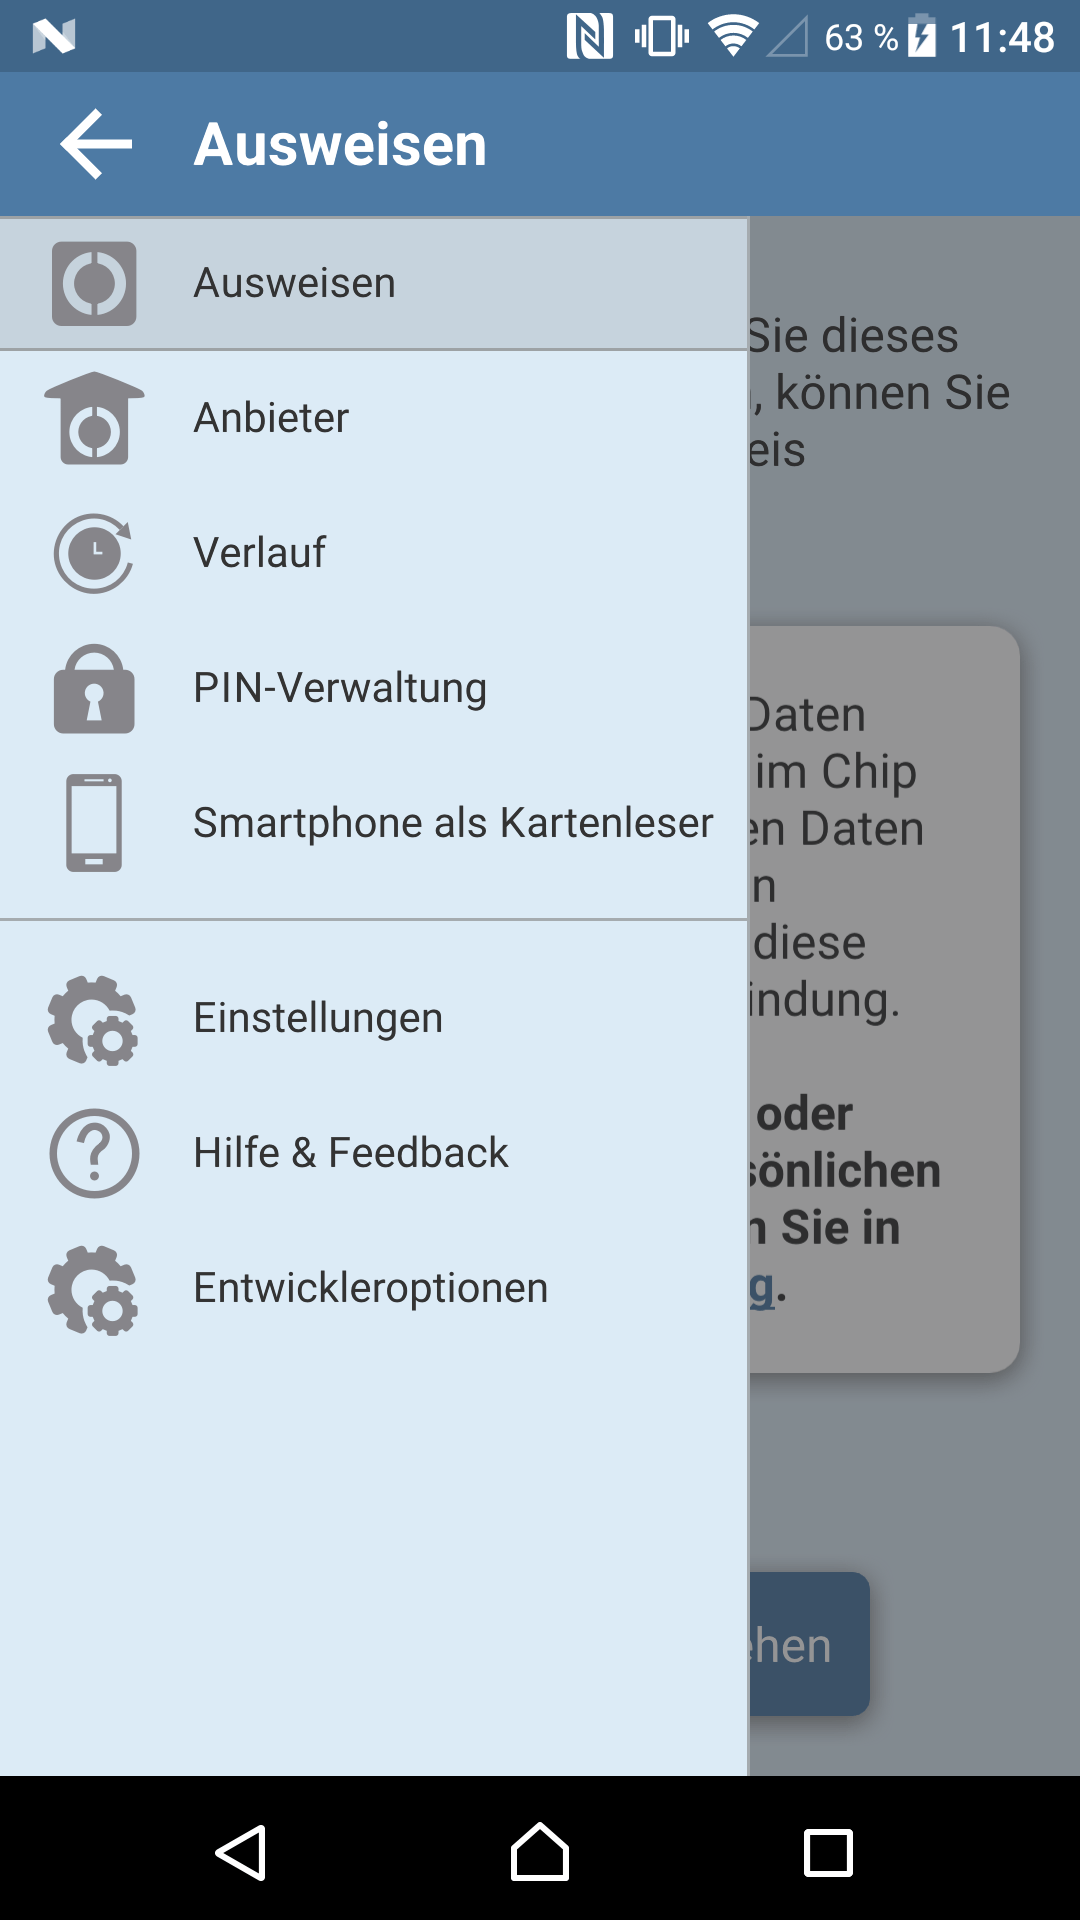 _images/Kopplung-01-android-hauptmenu.png